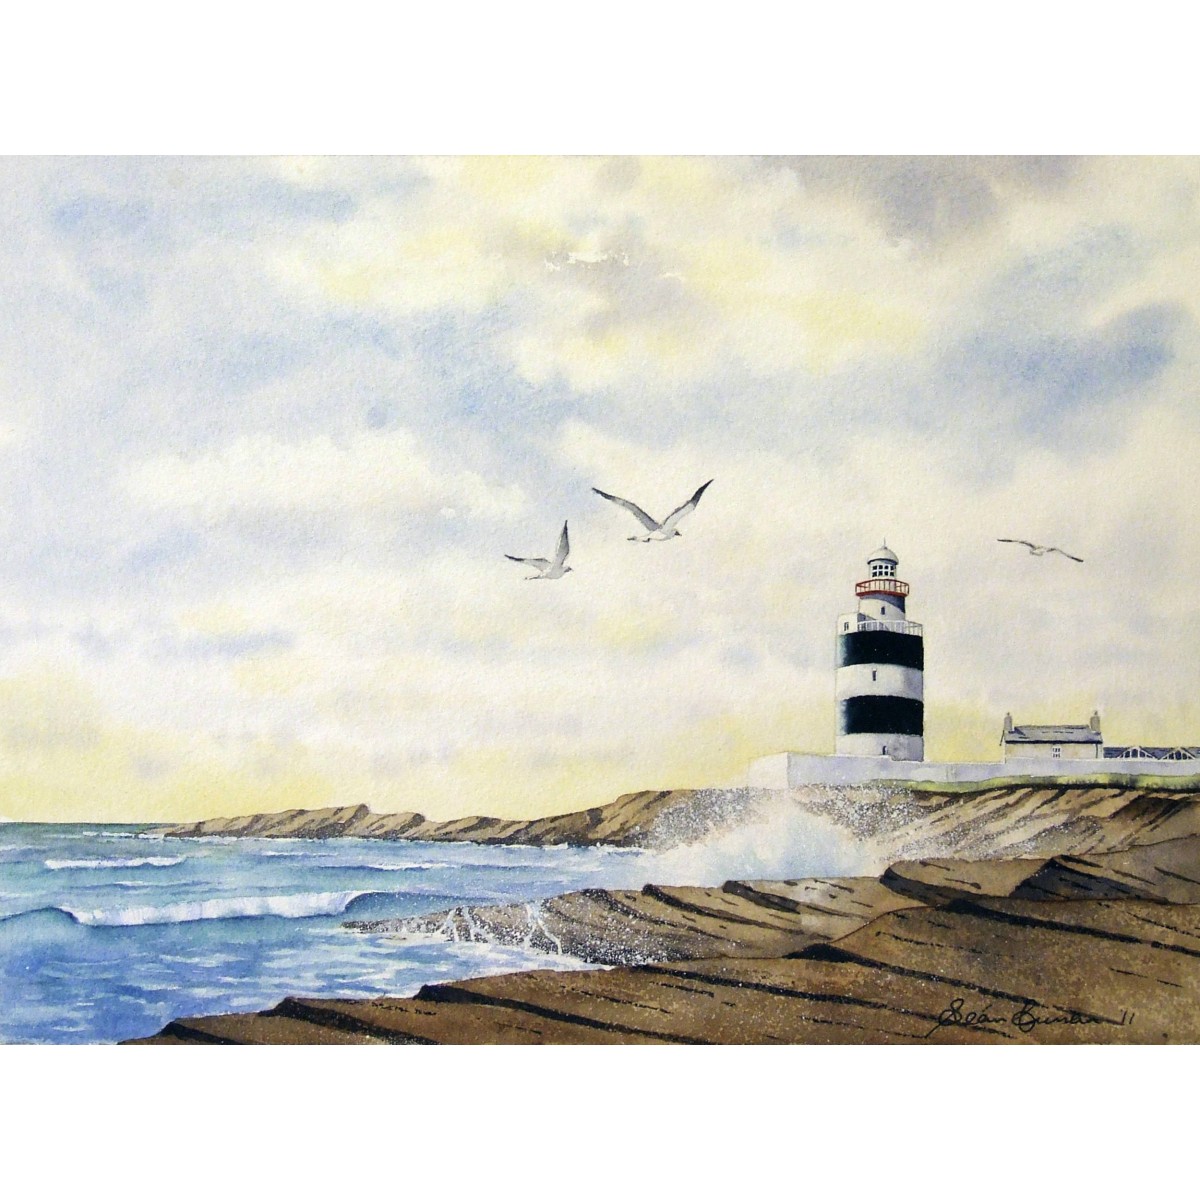 "The Hook Lighthouse, Wexford"